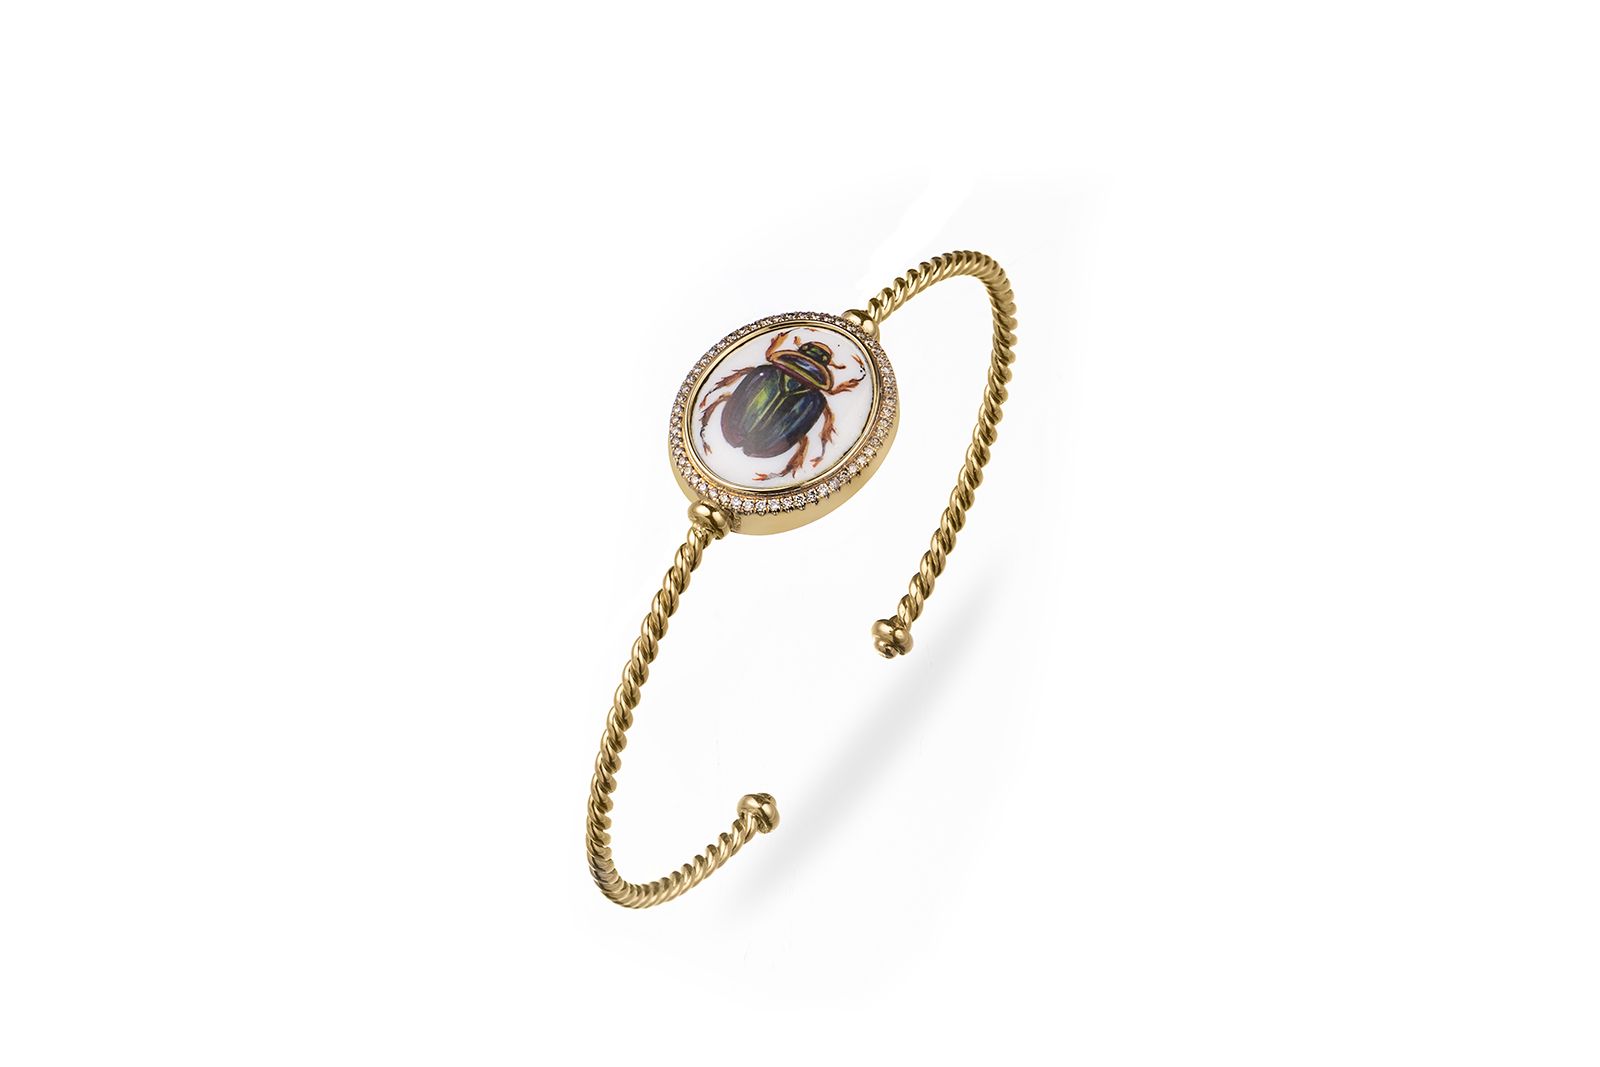 Penelope Fine Jewellery hand painted scarab beetle bracelet from the Meanings Collection